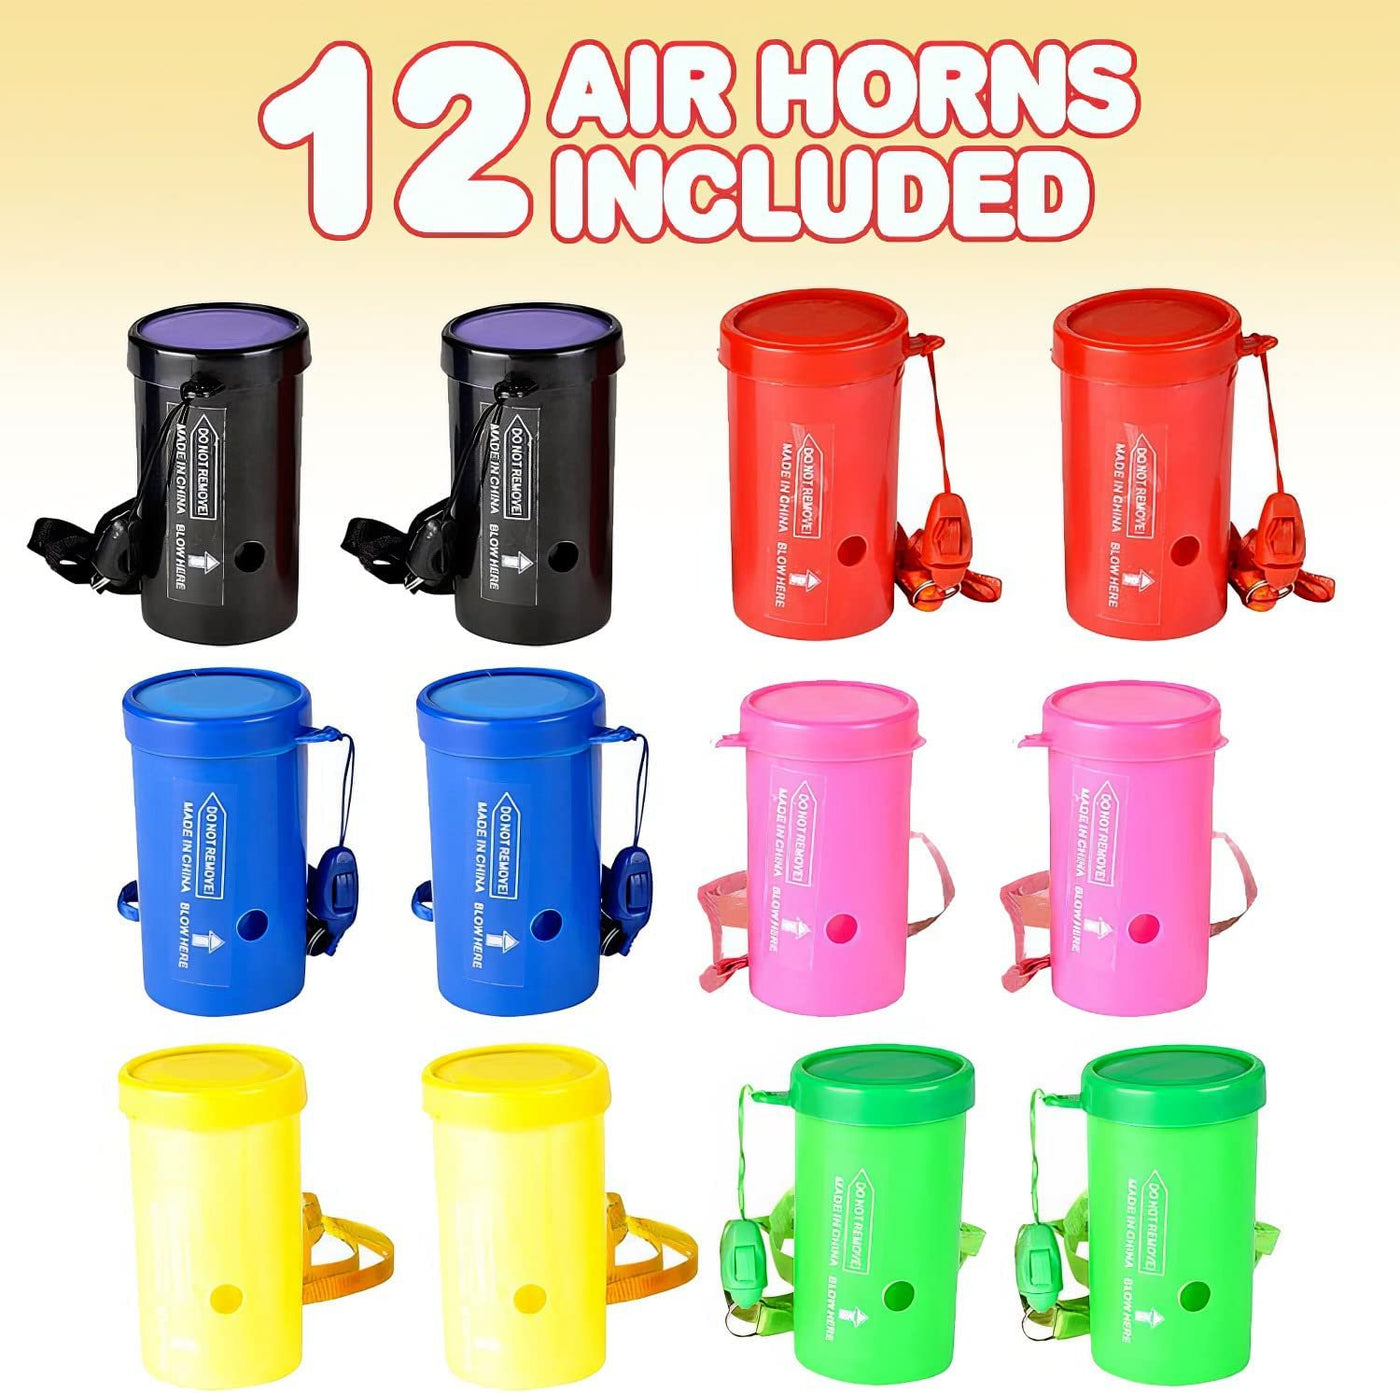 3 Mini Air Horns - Pack of 12 - Noisemakers for Sporting Events, Part ·  Art Creativity